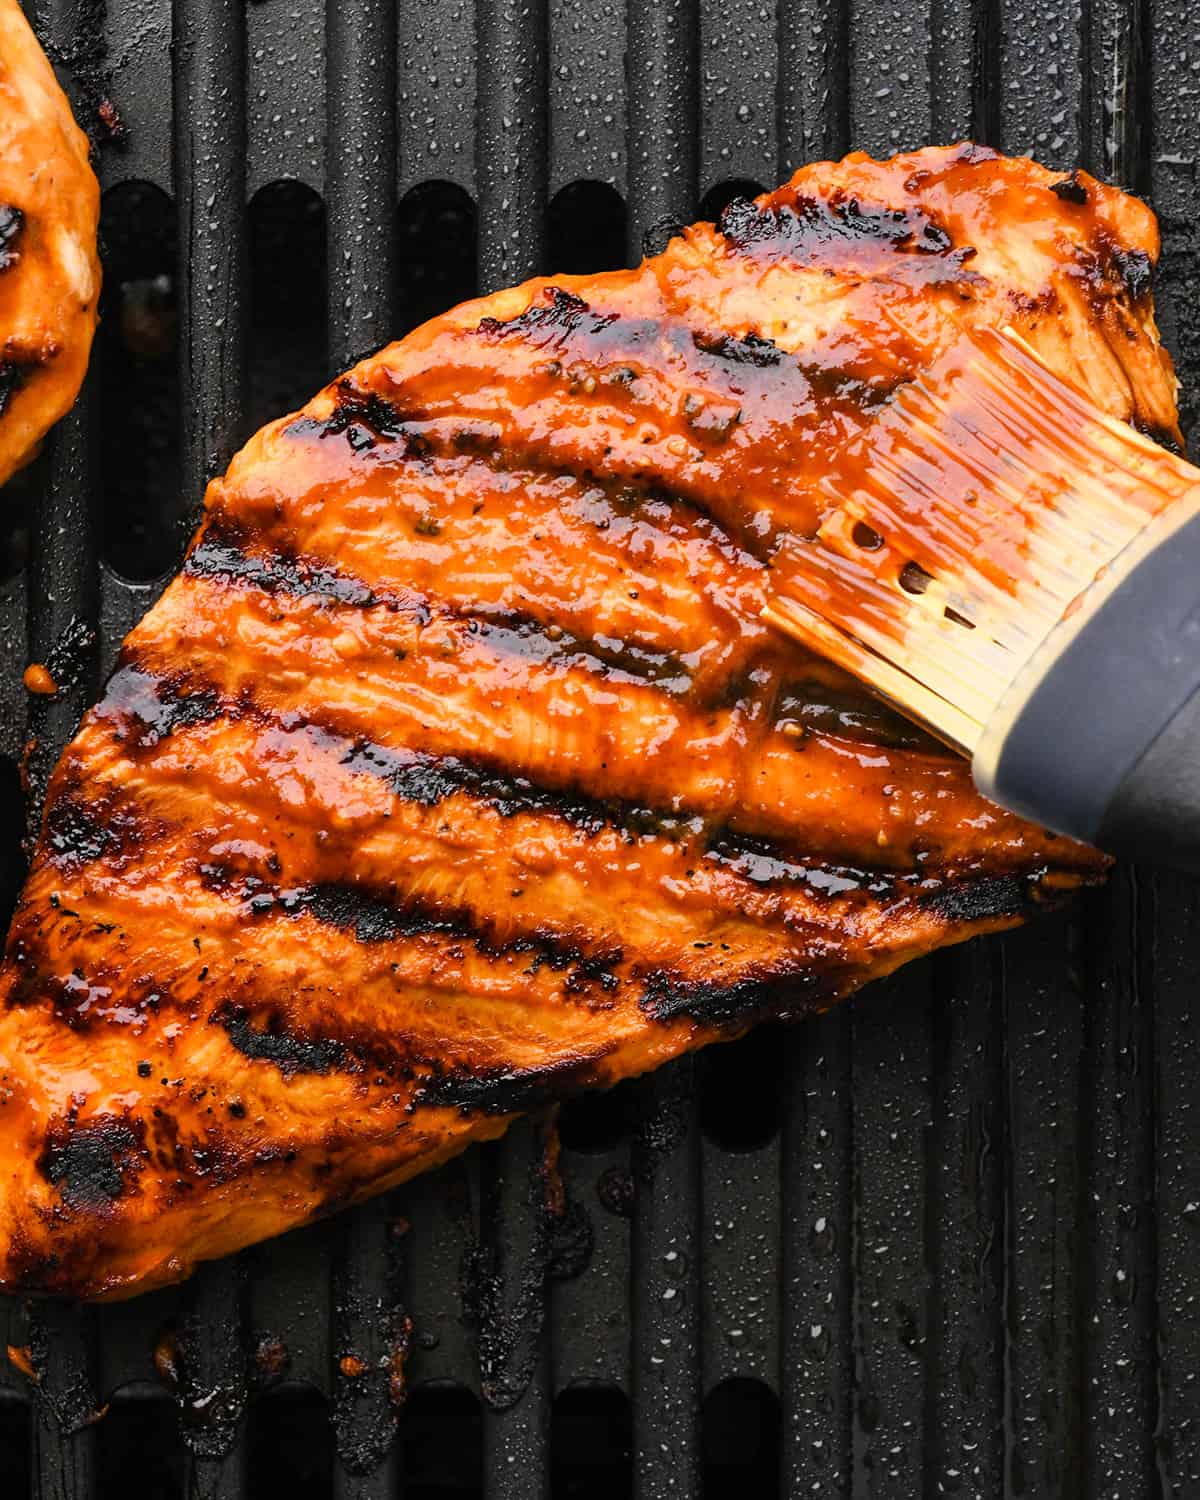 How to Make BBQ Chicken - BBQ sauce being brushed onto a chicken breast on the grill